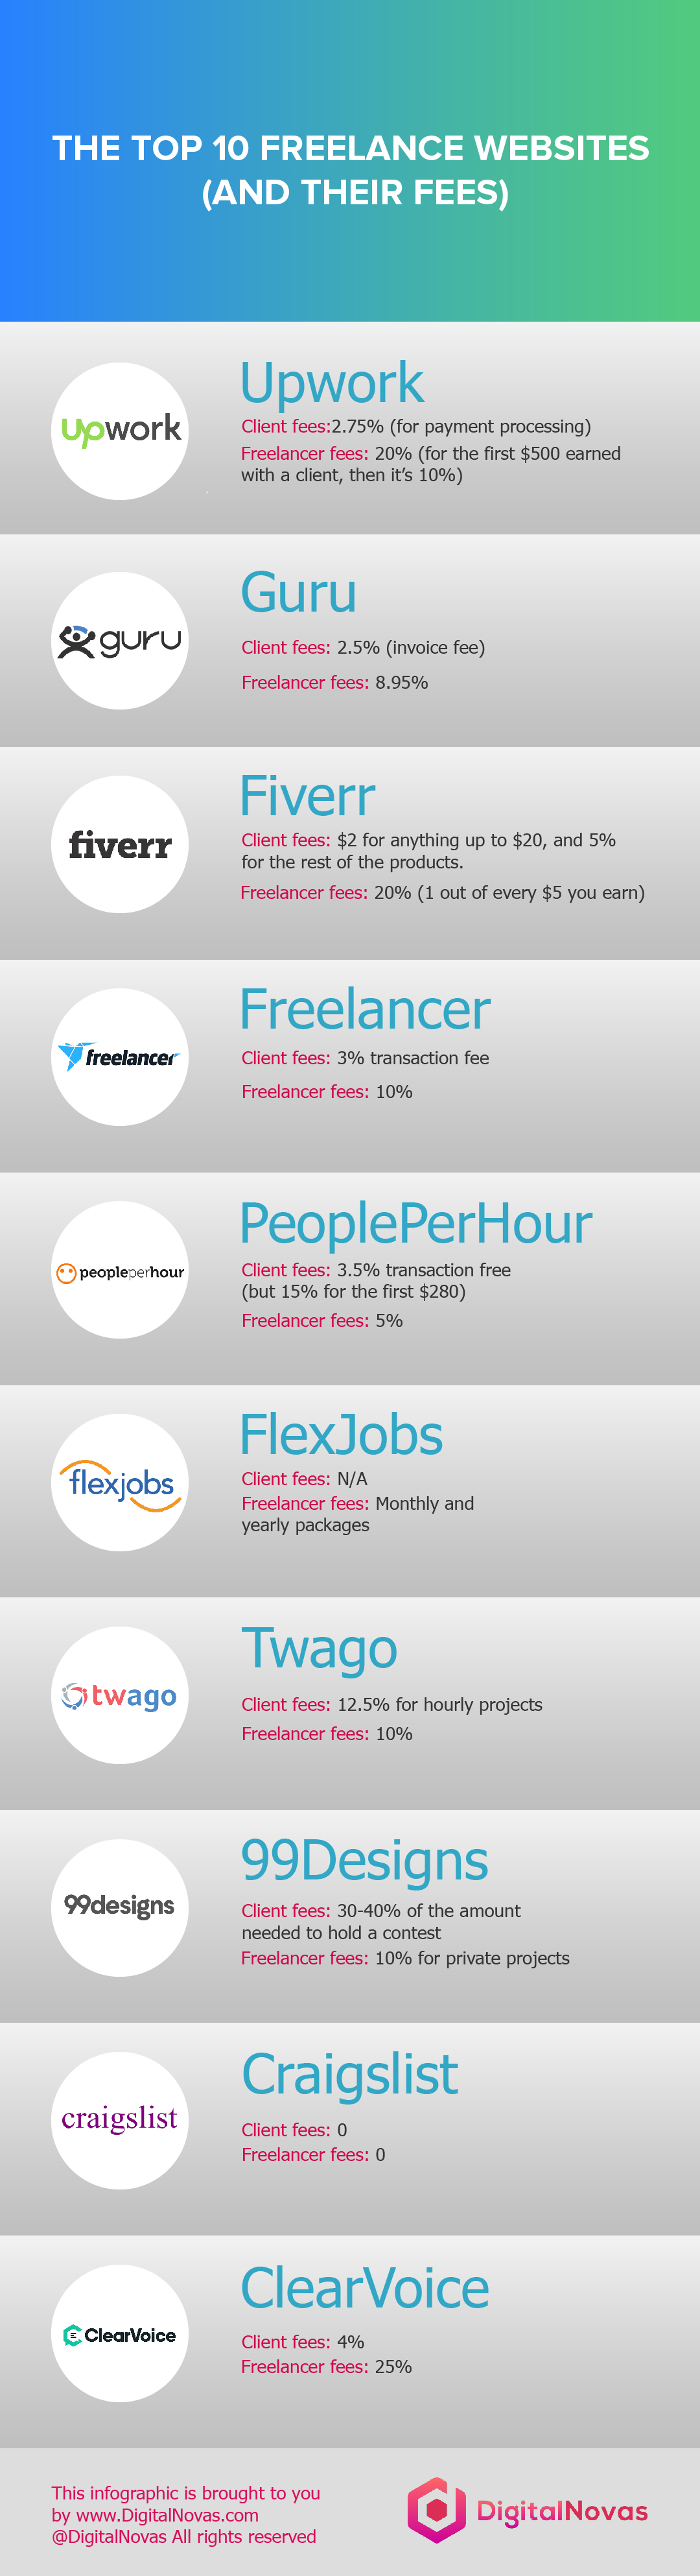 Freelance Websites and their Fees